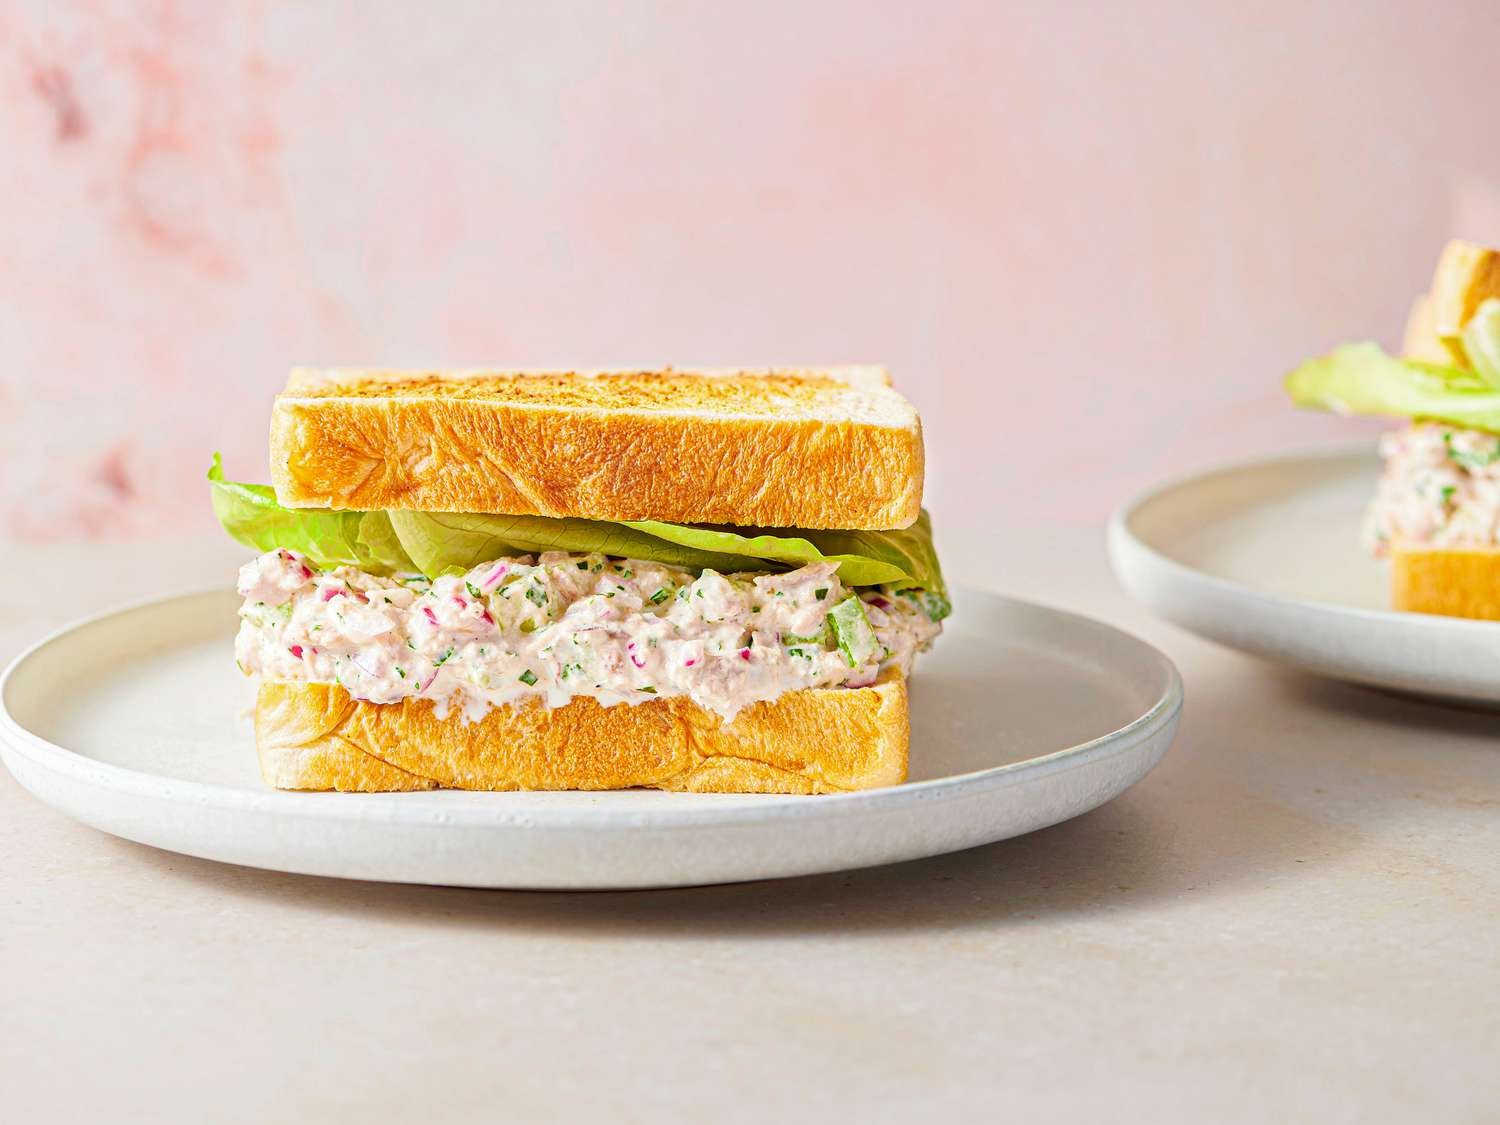 4 Classic Tuna Salad Sandwich Recipes That Will Make Your Lunch Exciting - Poke Bowl Cocoabeach